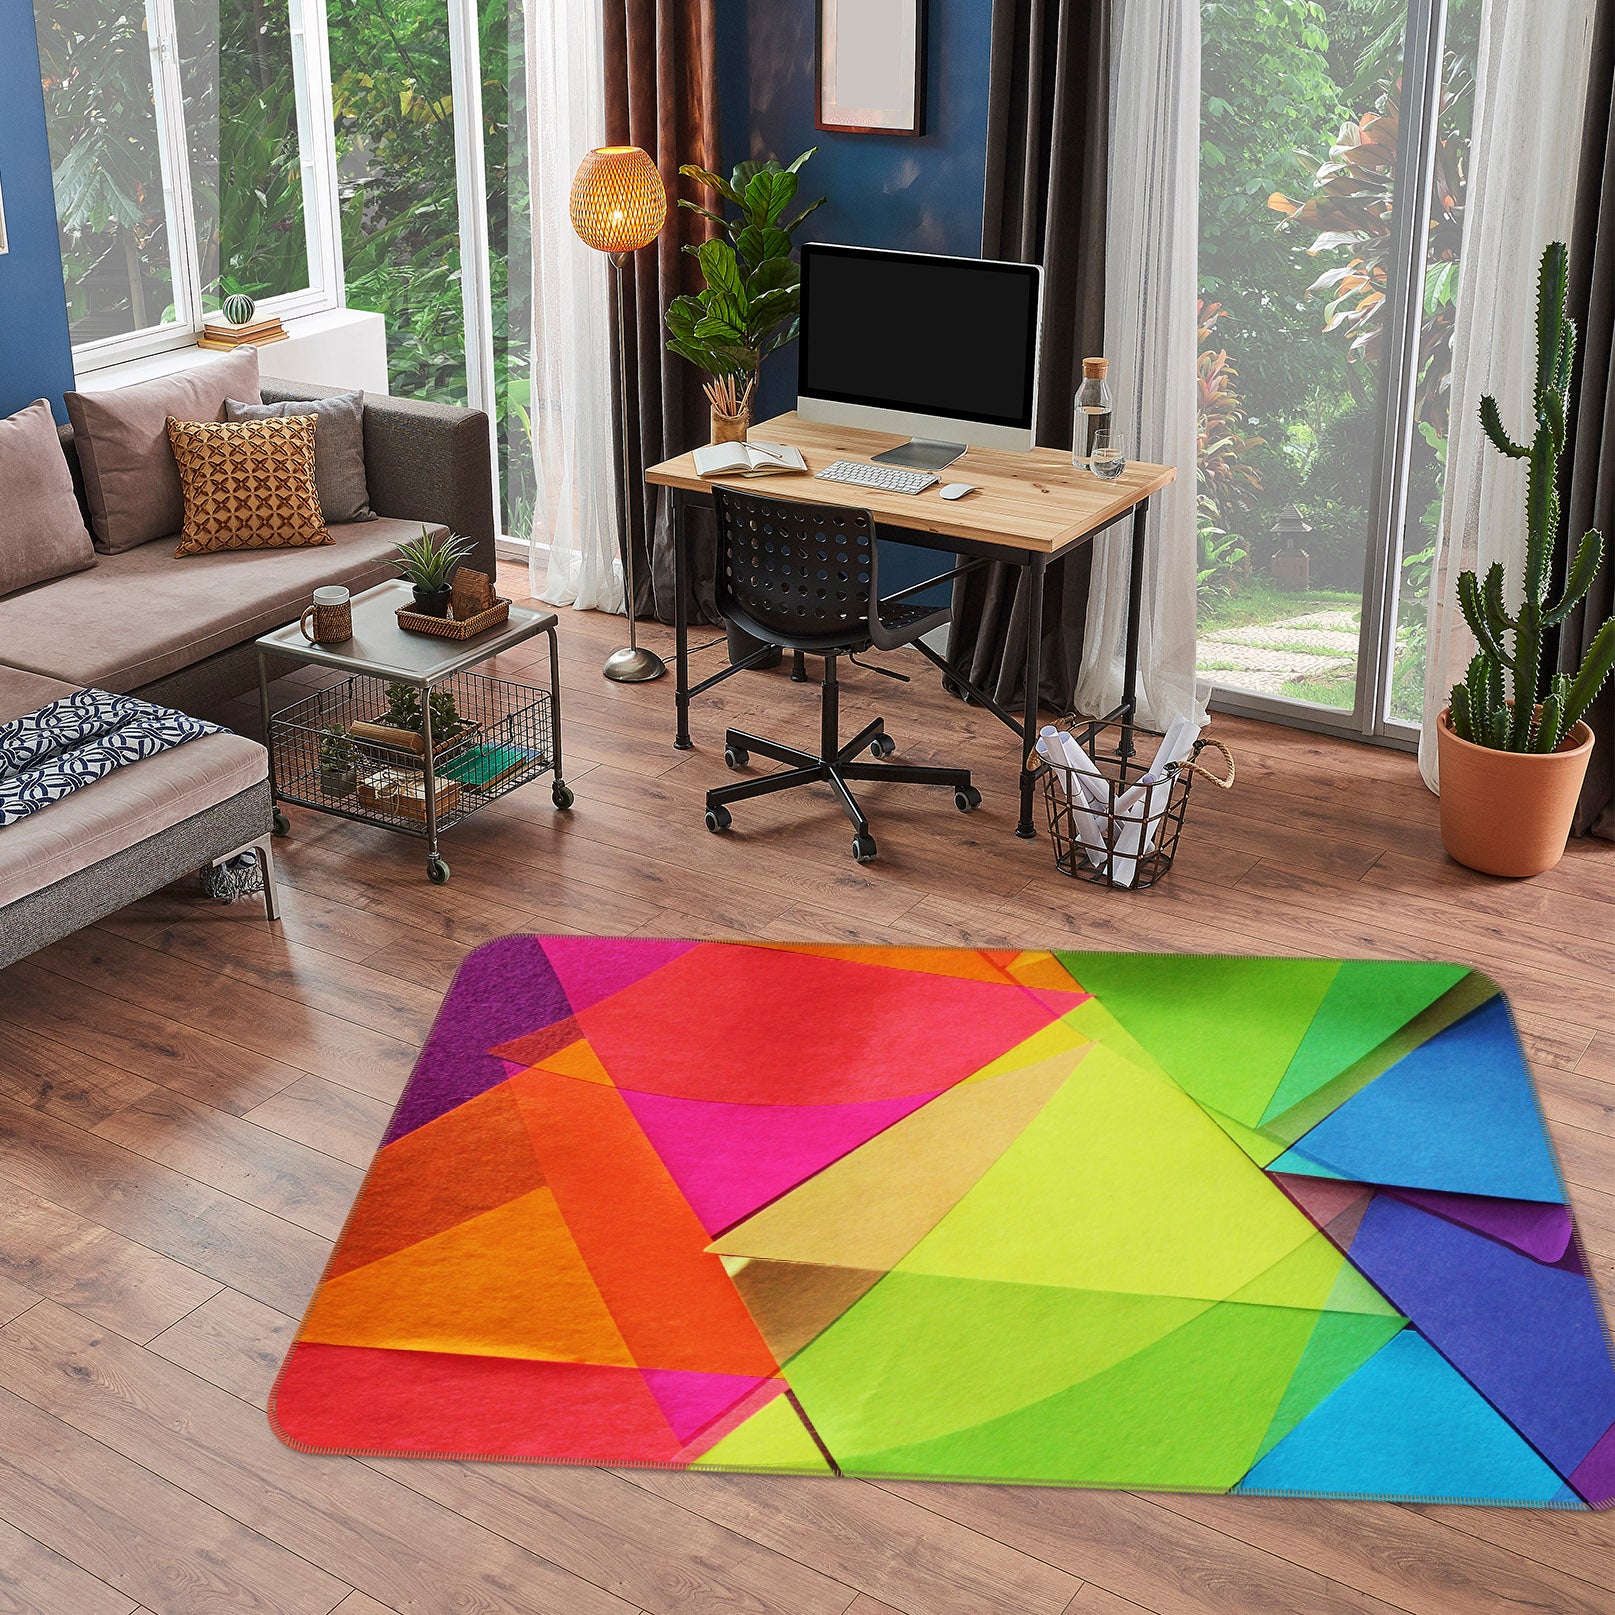 3D Colored Triangle 71025 Shandra Smith Rug Non Slip Rug Mat